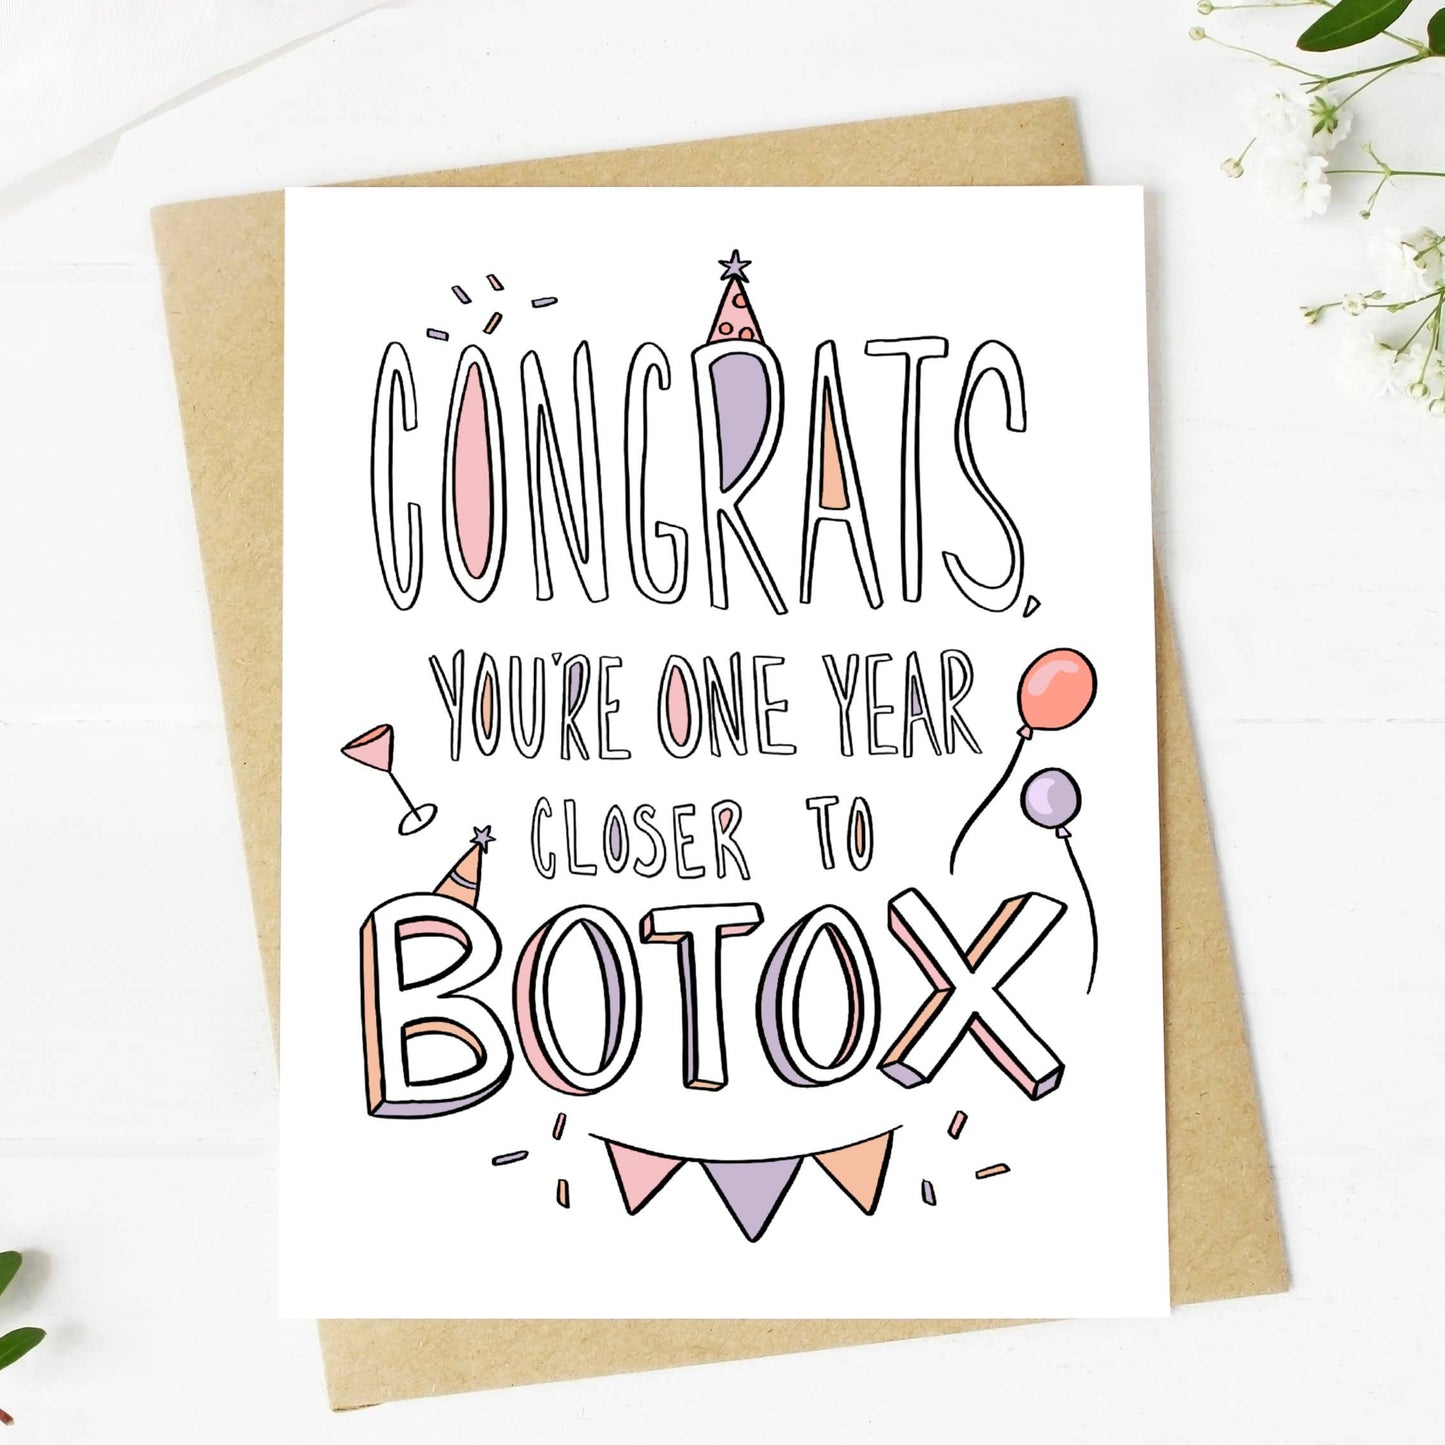 "Congrats You're One Year Closer To Botox" Birthday Card